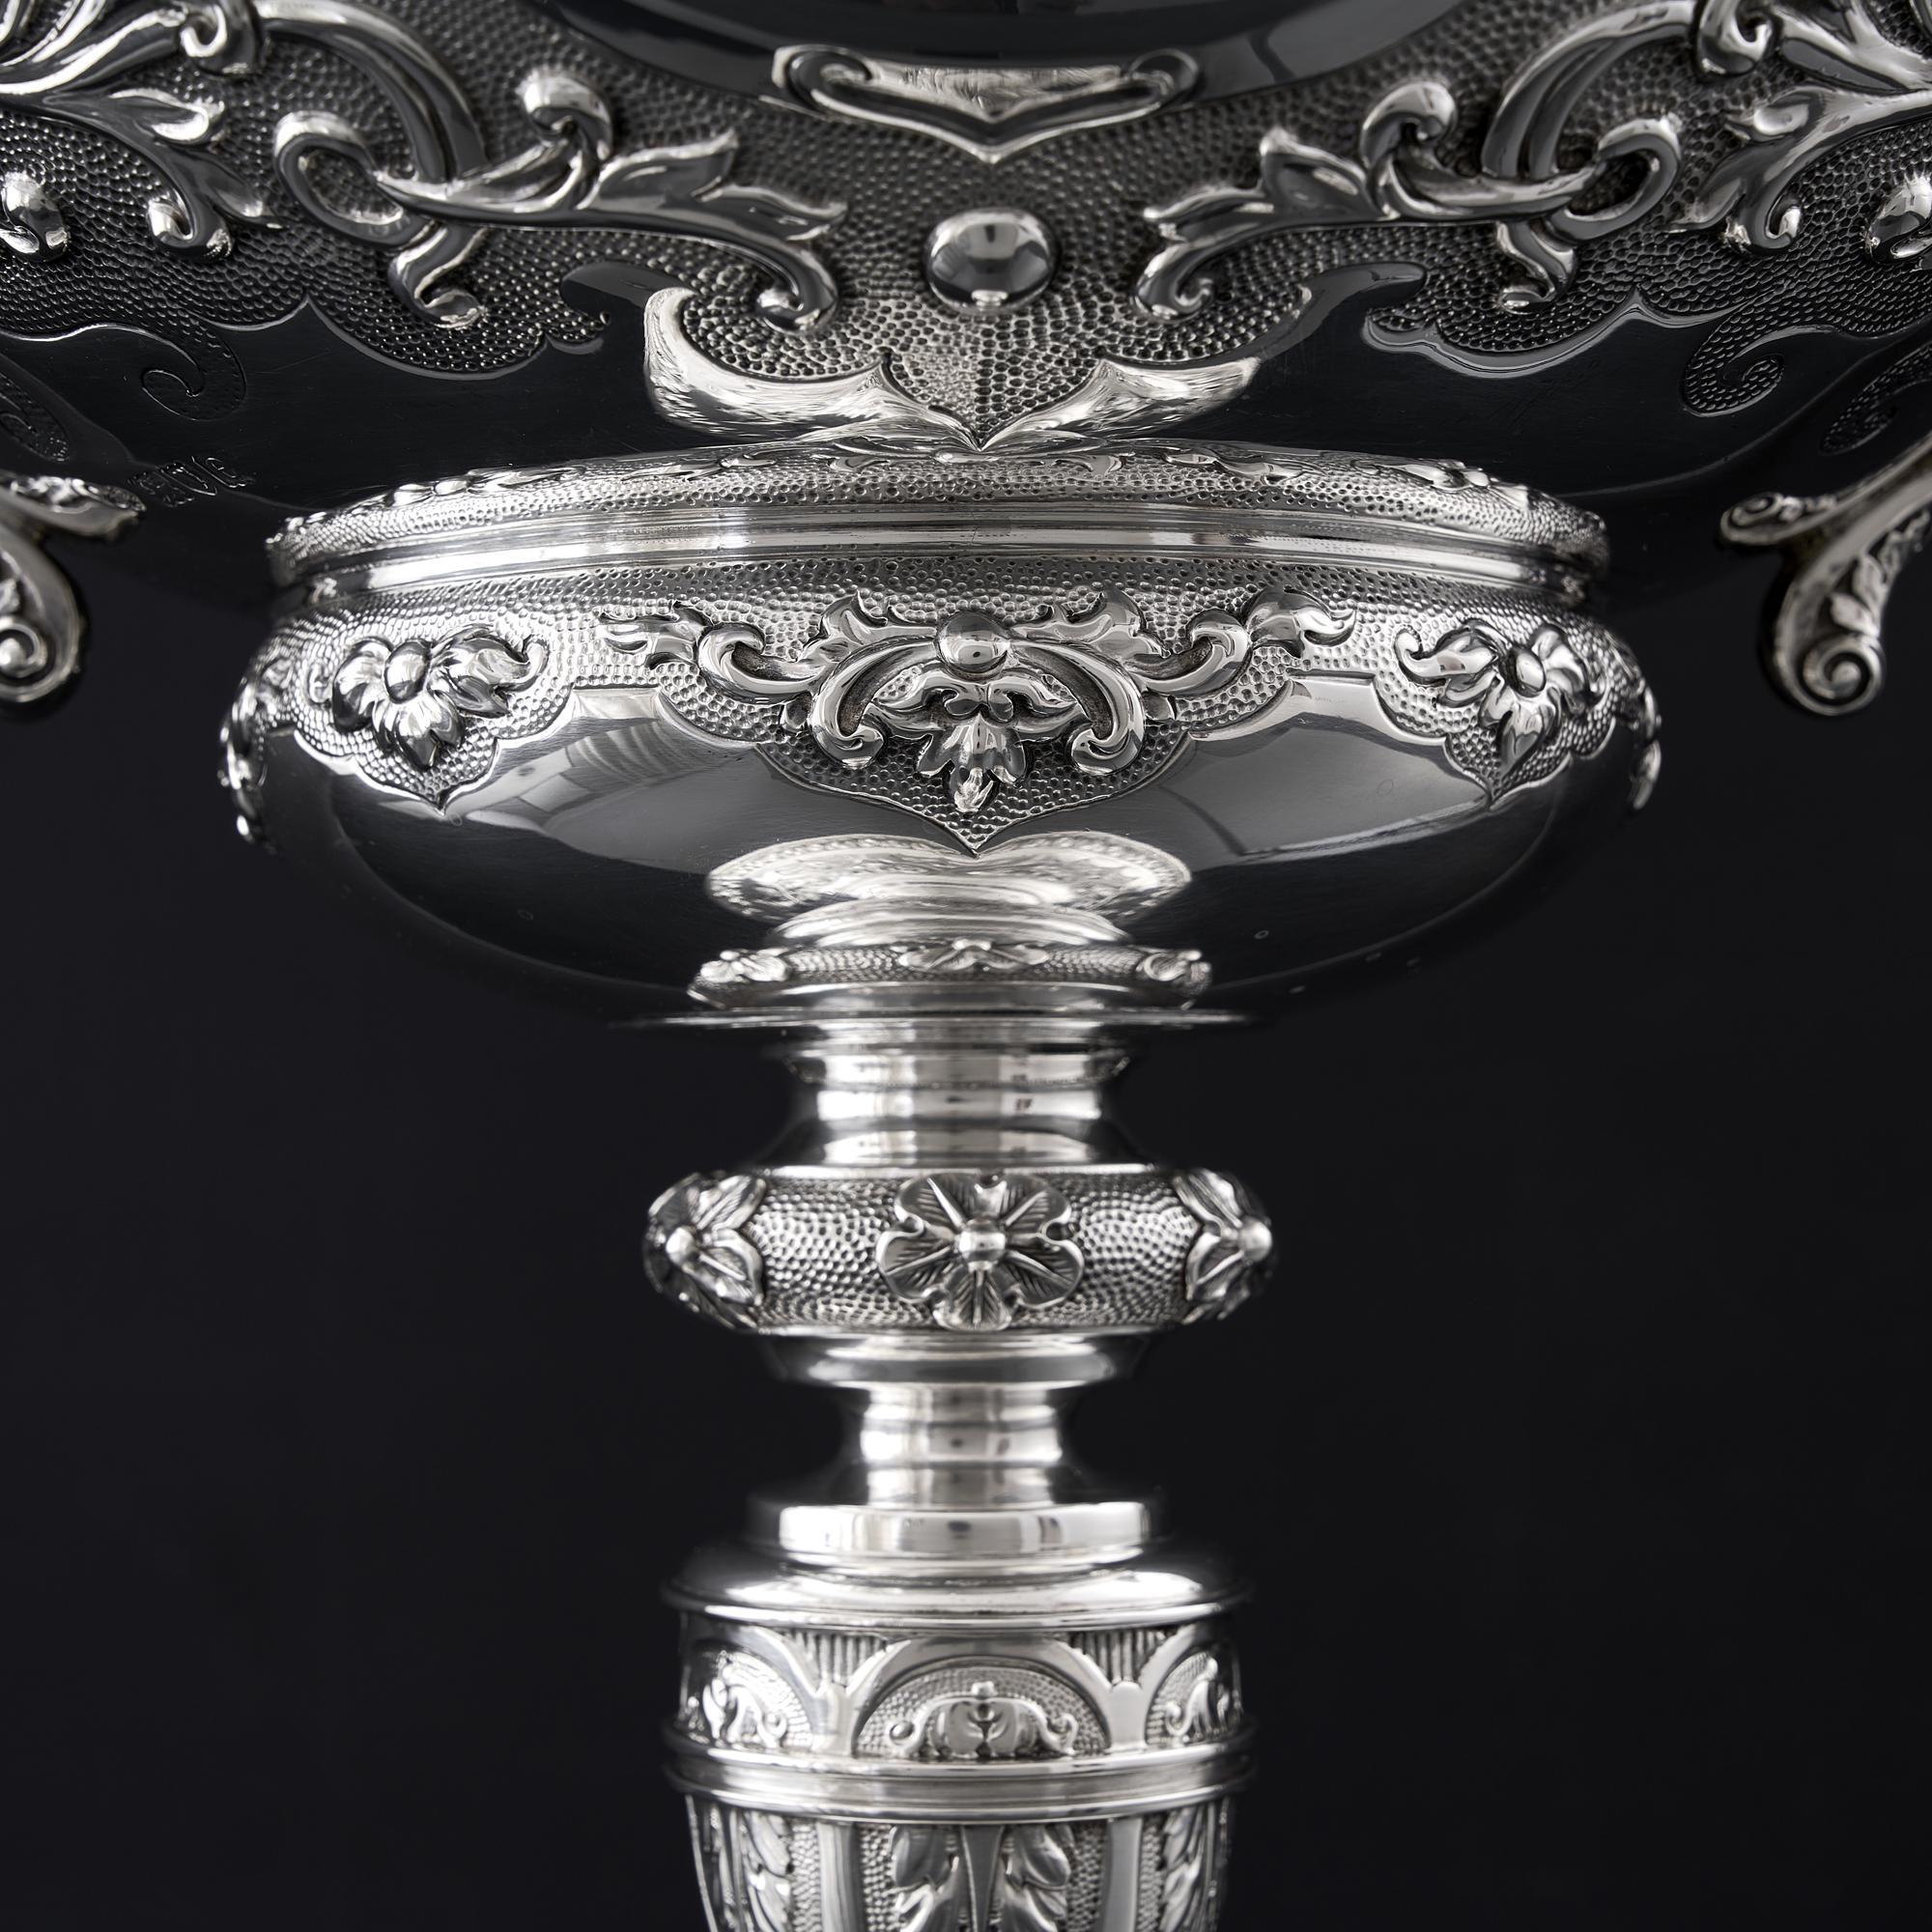 20th Century Two-handled antique sterling silver trophy comport